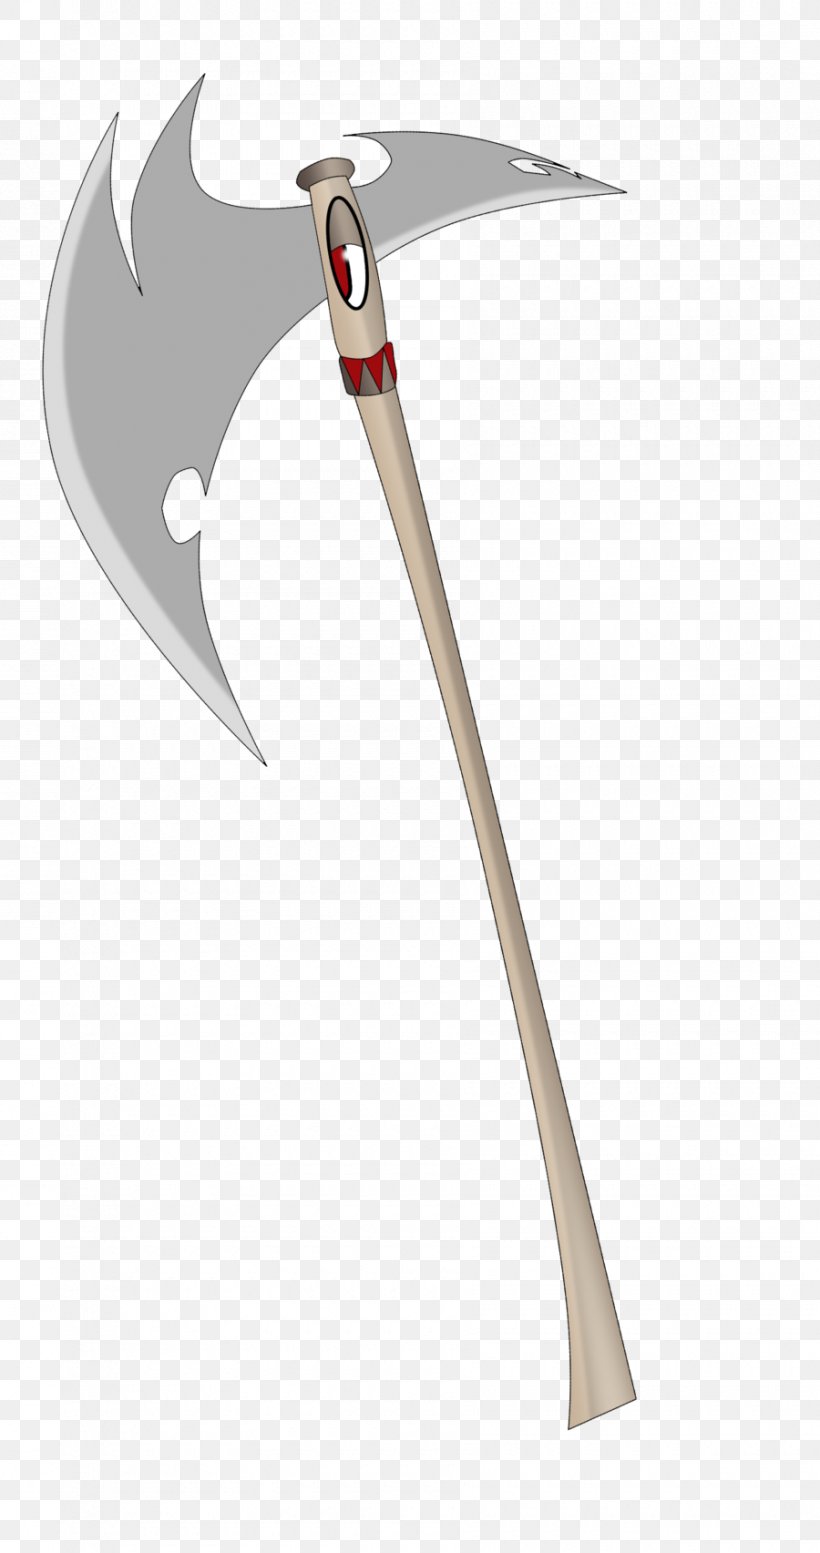 Throwing Axe Product Design, PNG, 900x1705px, Axe, Throwing, Throwing Axe, Tool, Weapon Download Free